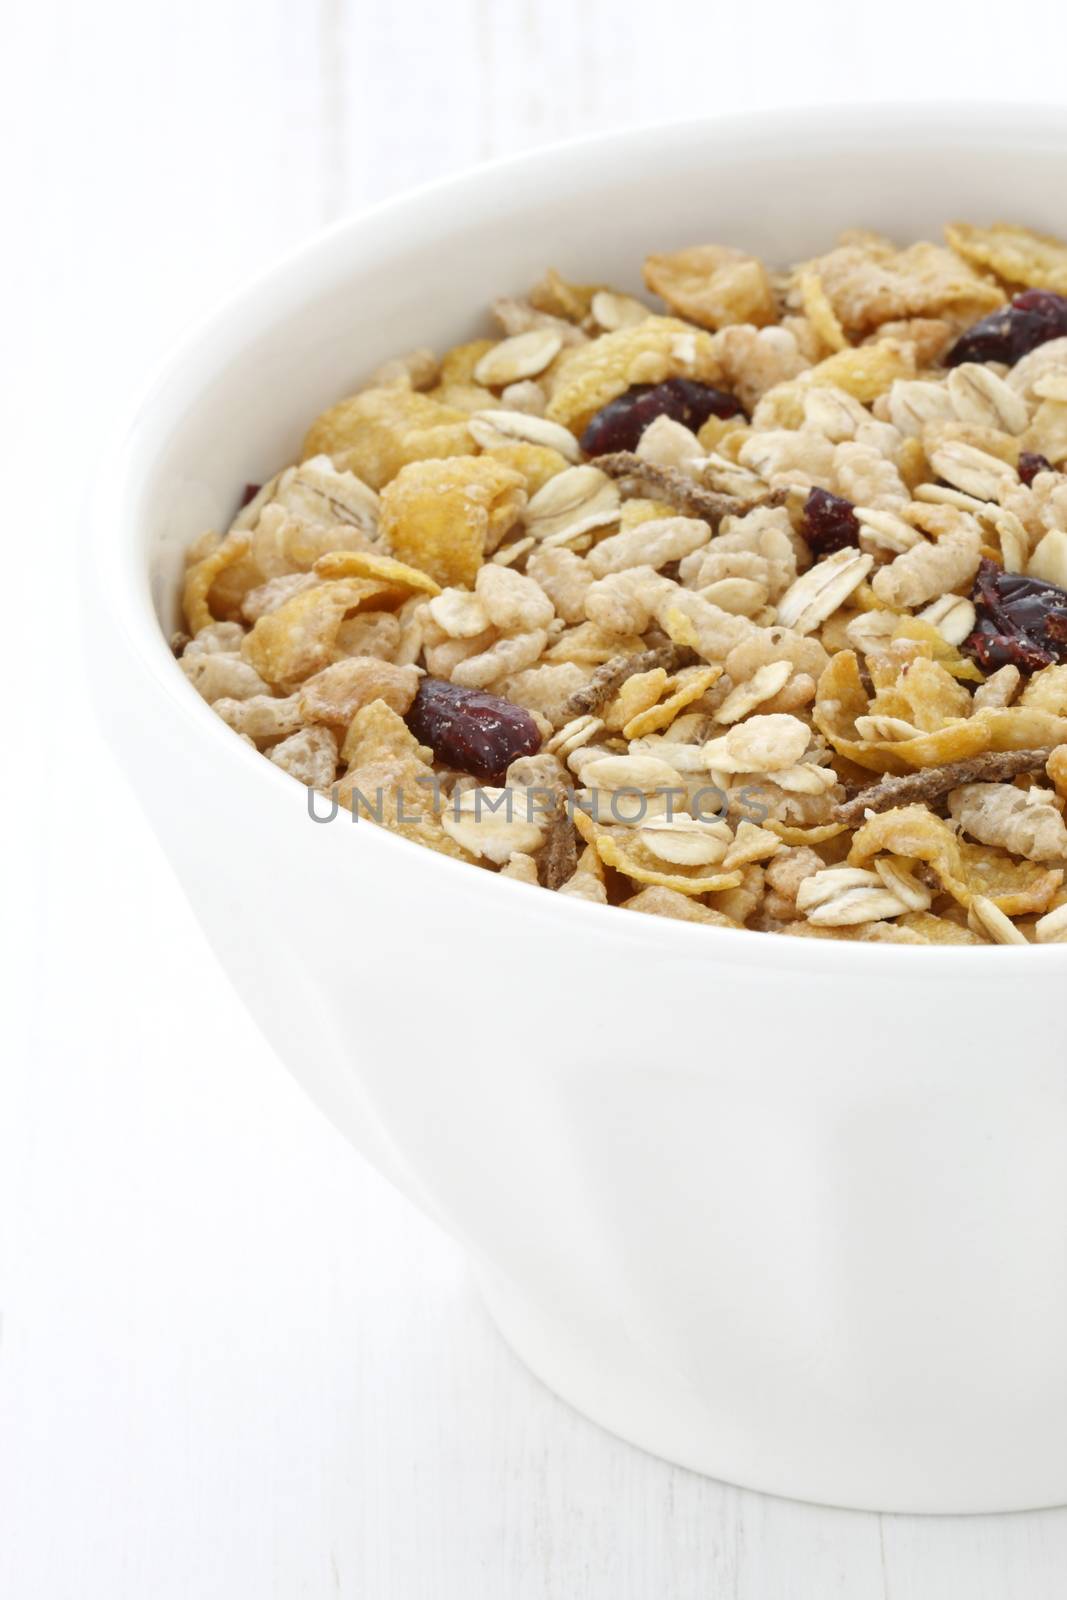 Delicious and healthy muesli cereal  by tacar